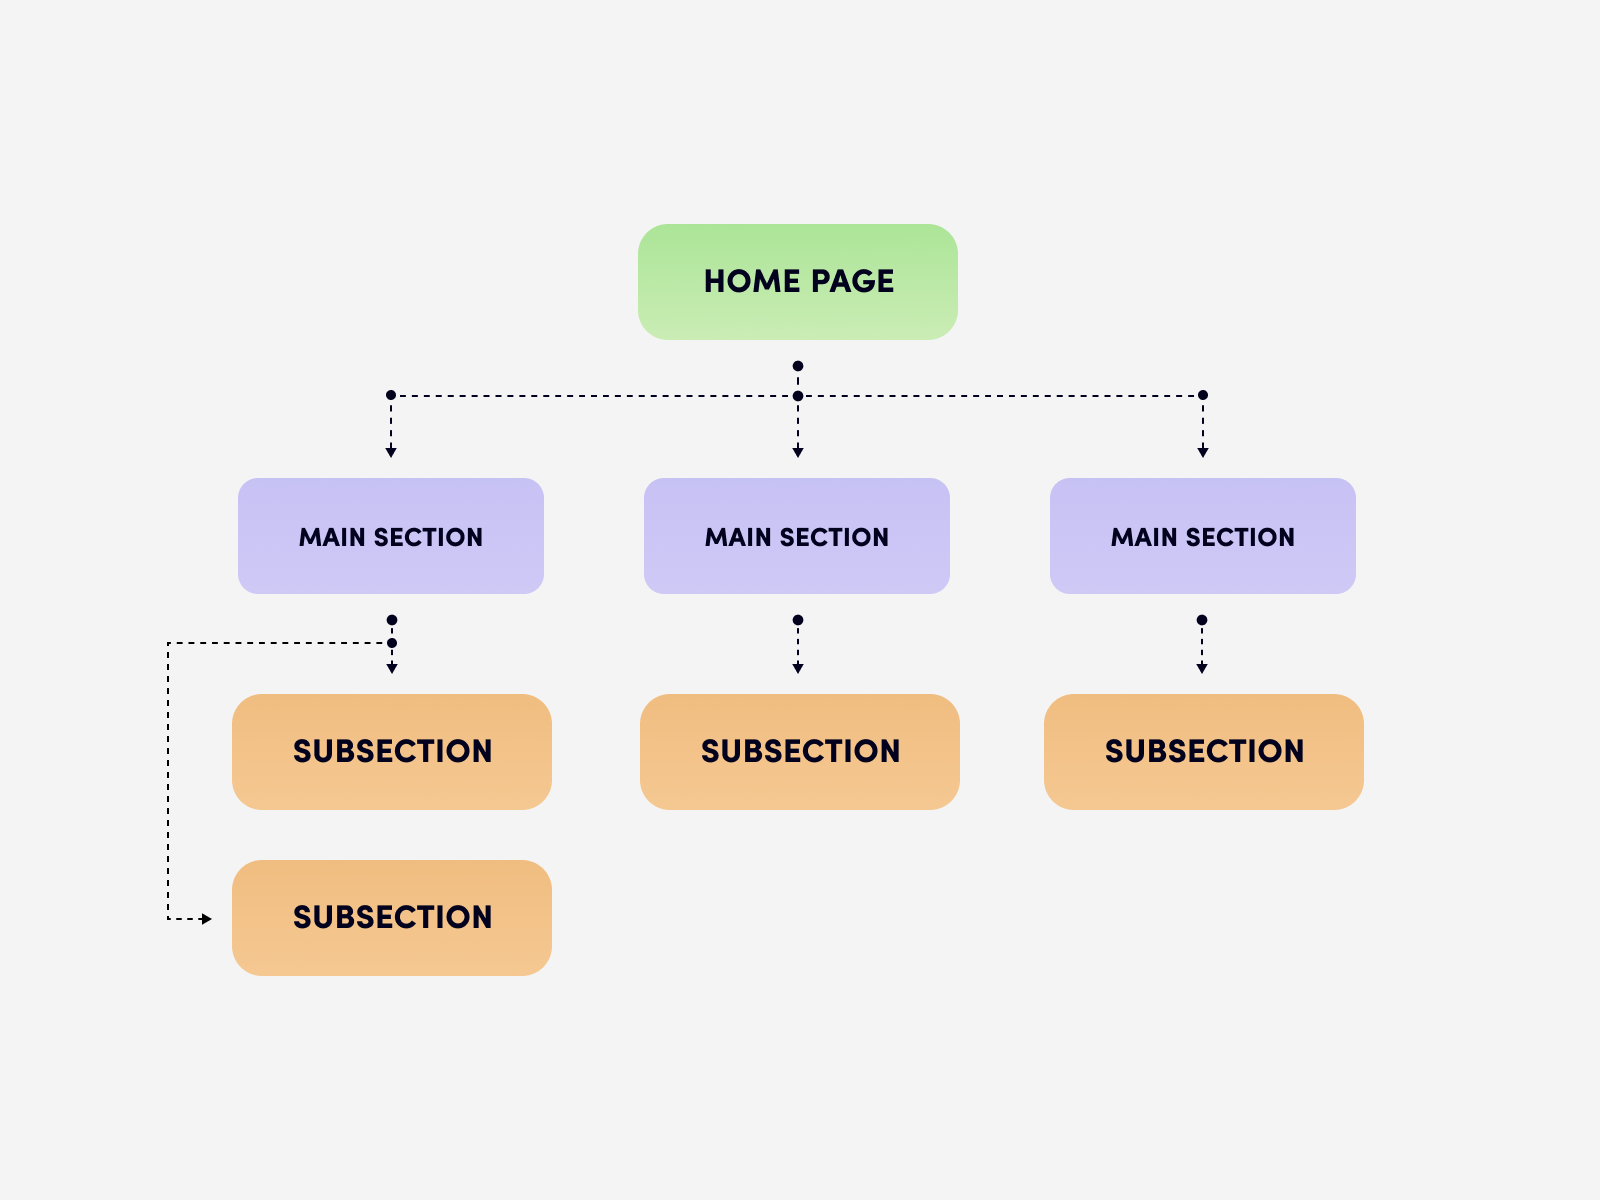 A hierarchical structure is popular for easy navigation on large websites